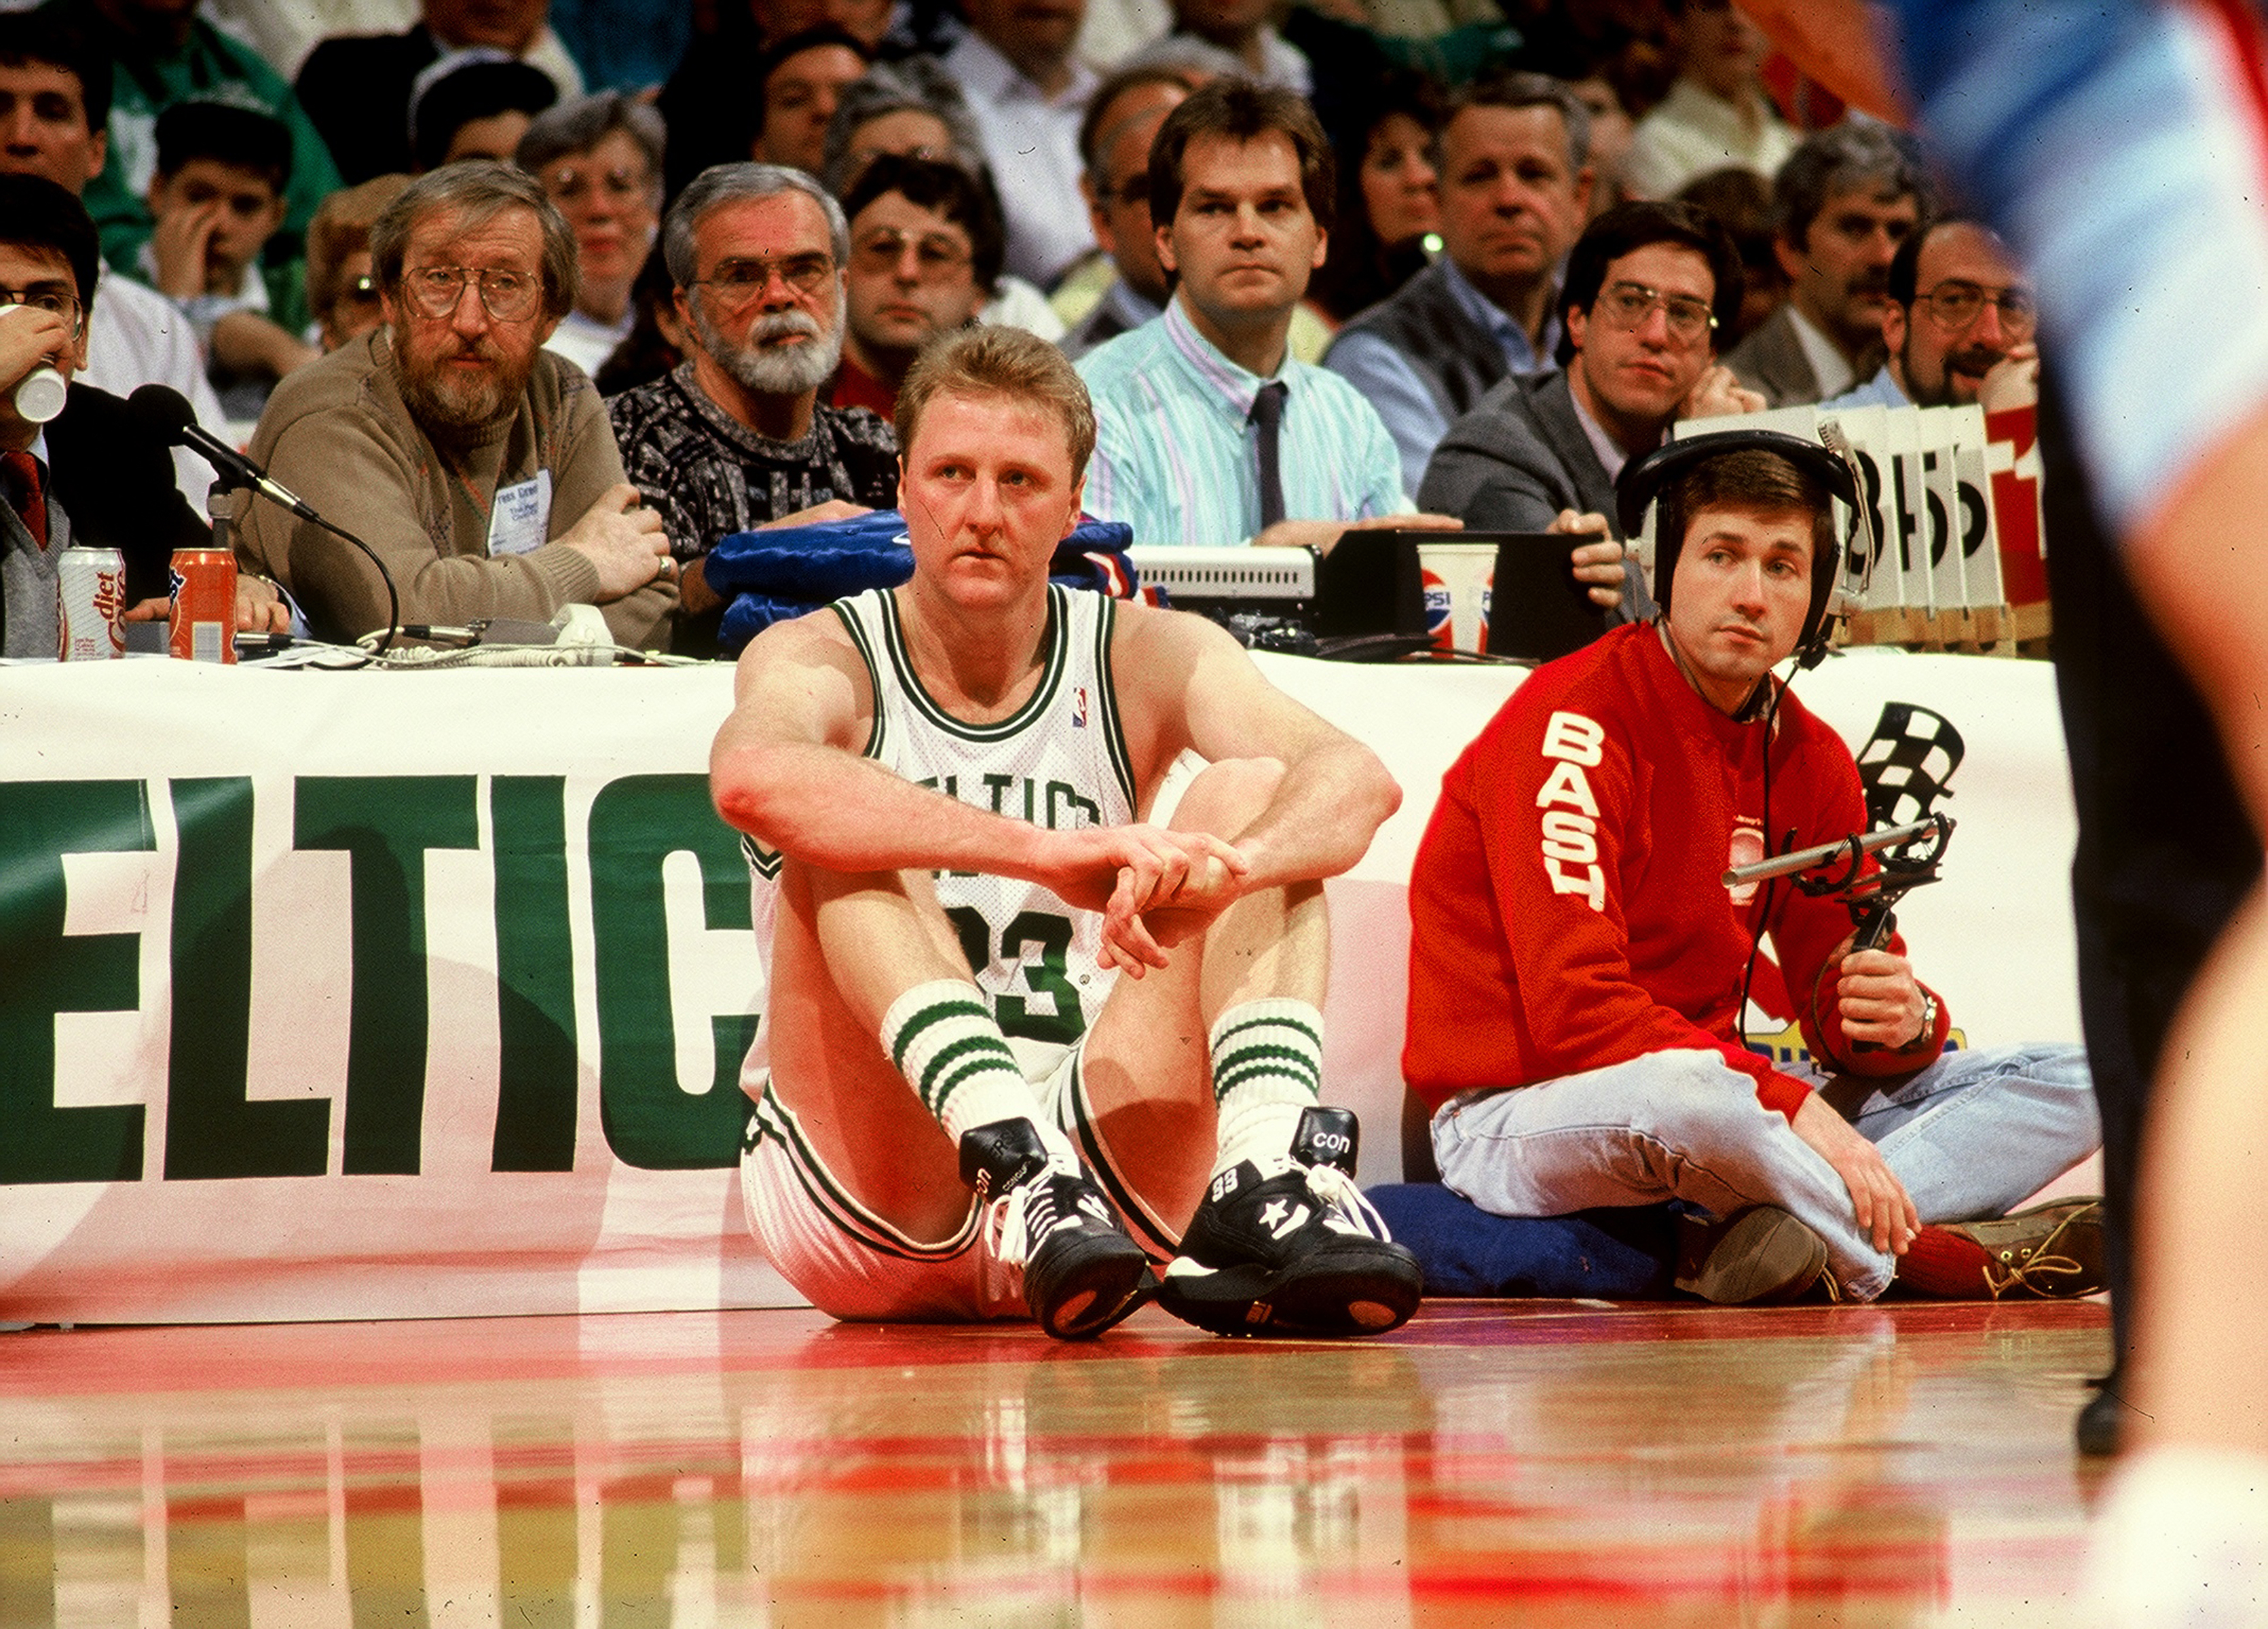 Boston Celtics legend Larry Bird waits by the scorer's table during an NBA game in 1991